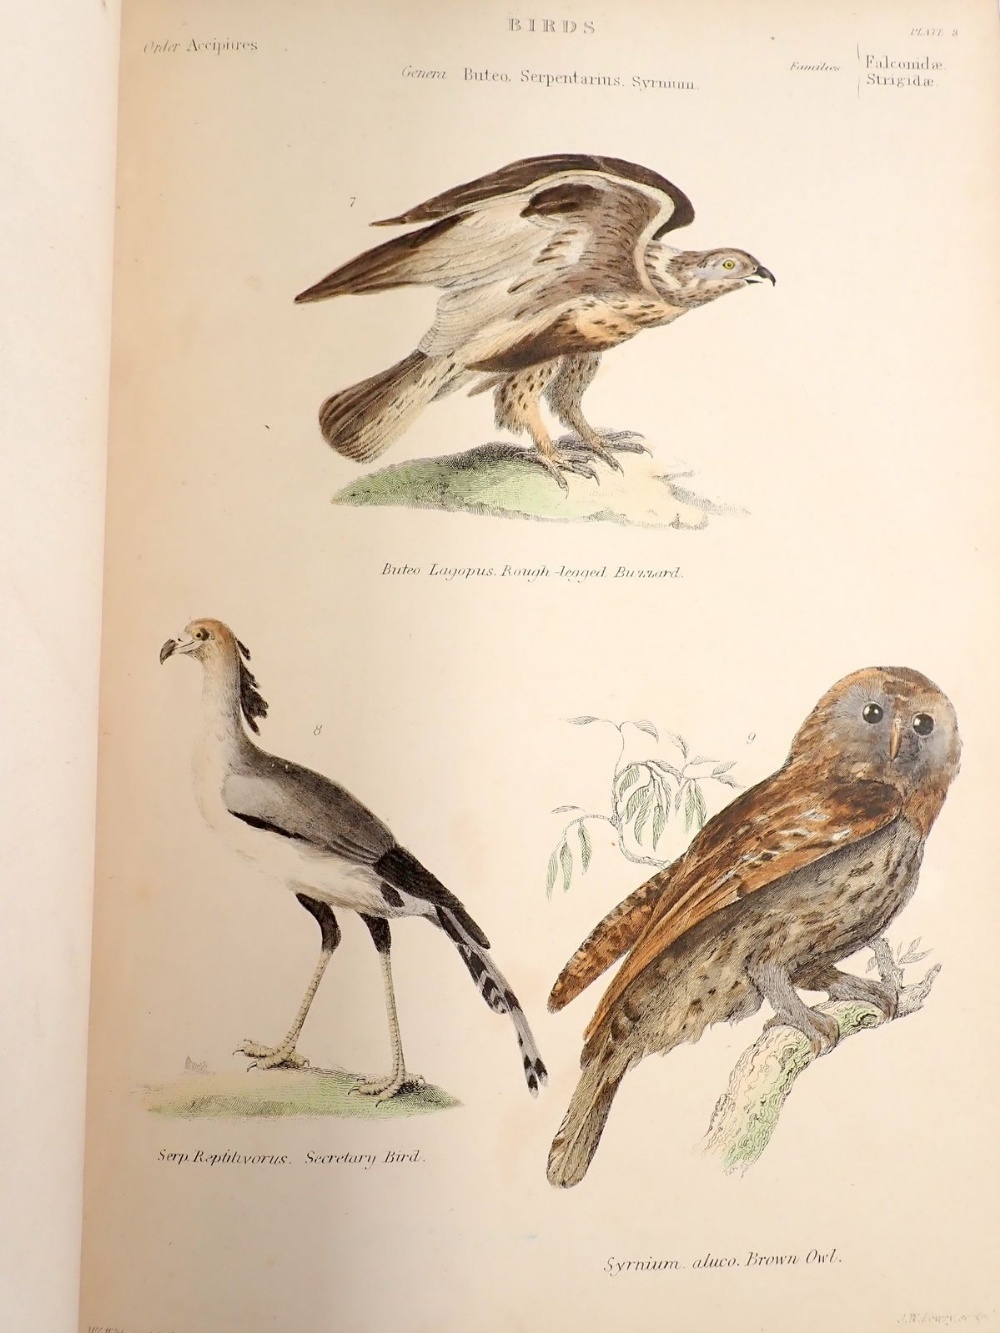 The Museum of Natural History 'Birds' by William S Dallas, multiple hand coloured plates - Image 3 of 4